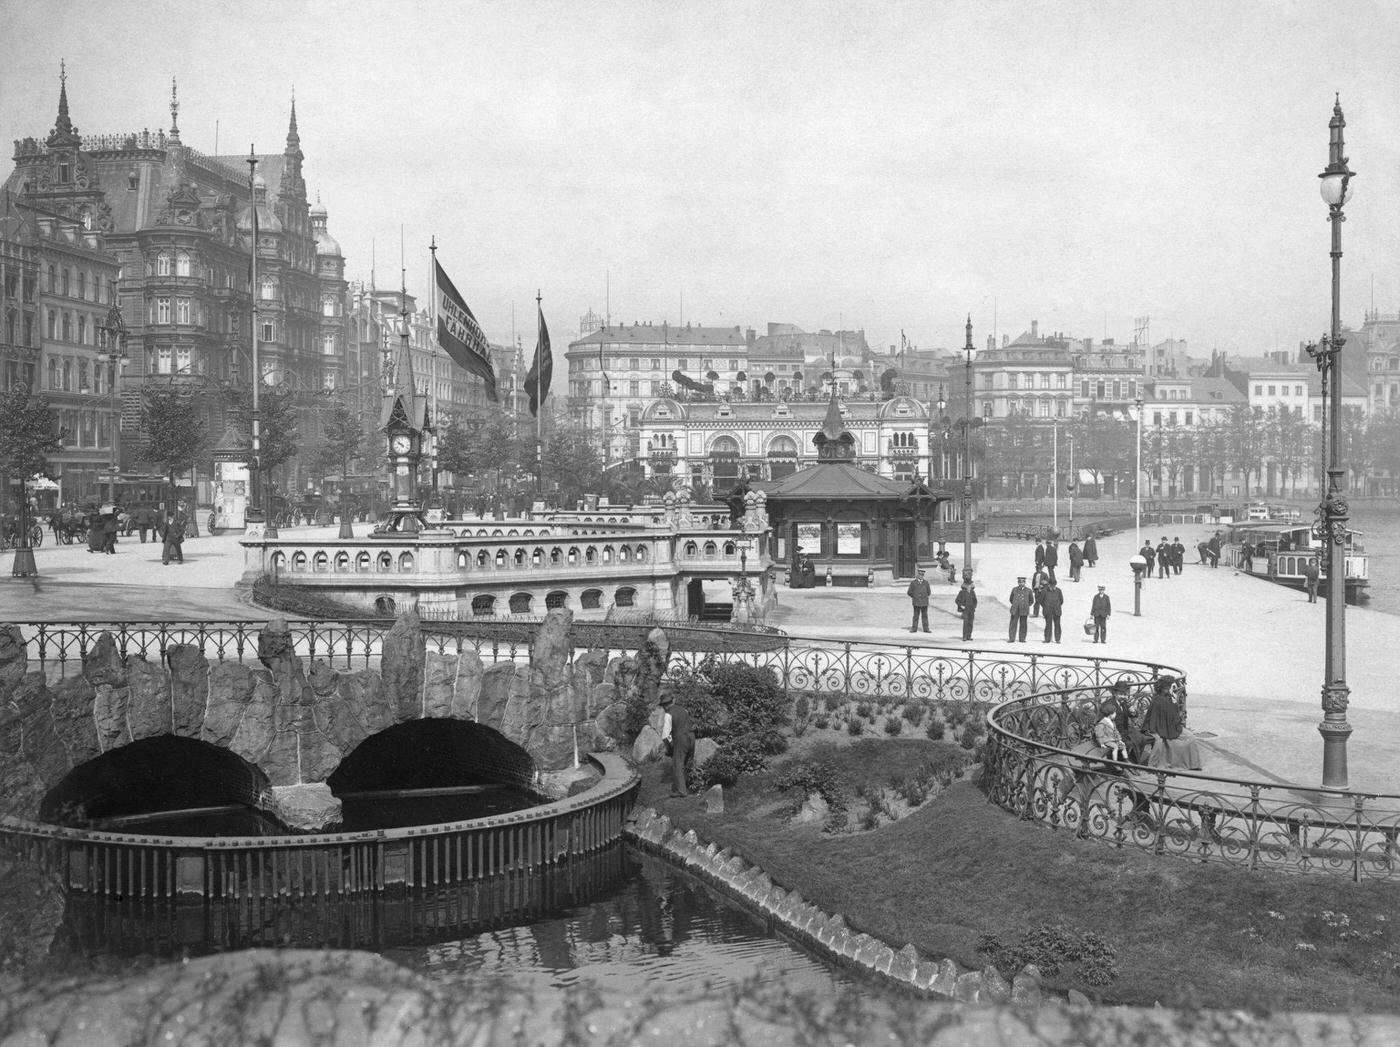 View of the Jungfernstieg promenade on the River Alster in Hamburg, Germany, with the Alster Pavillon in the background, 1910